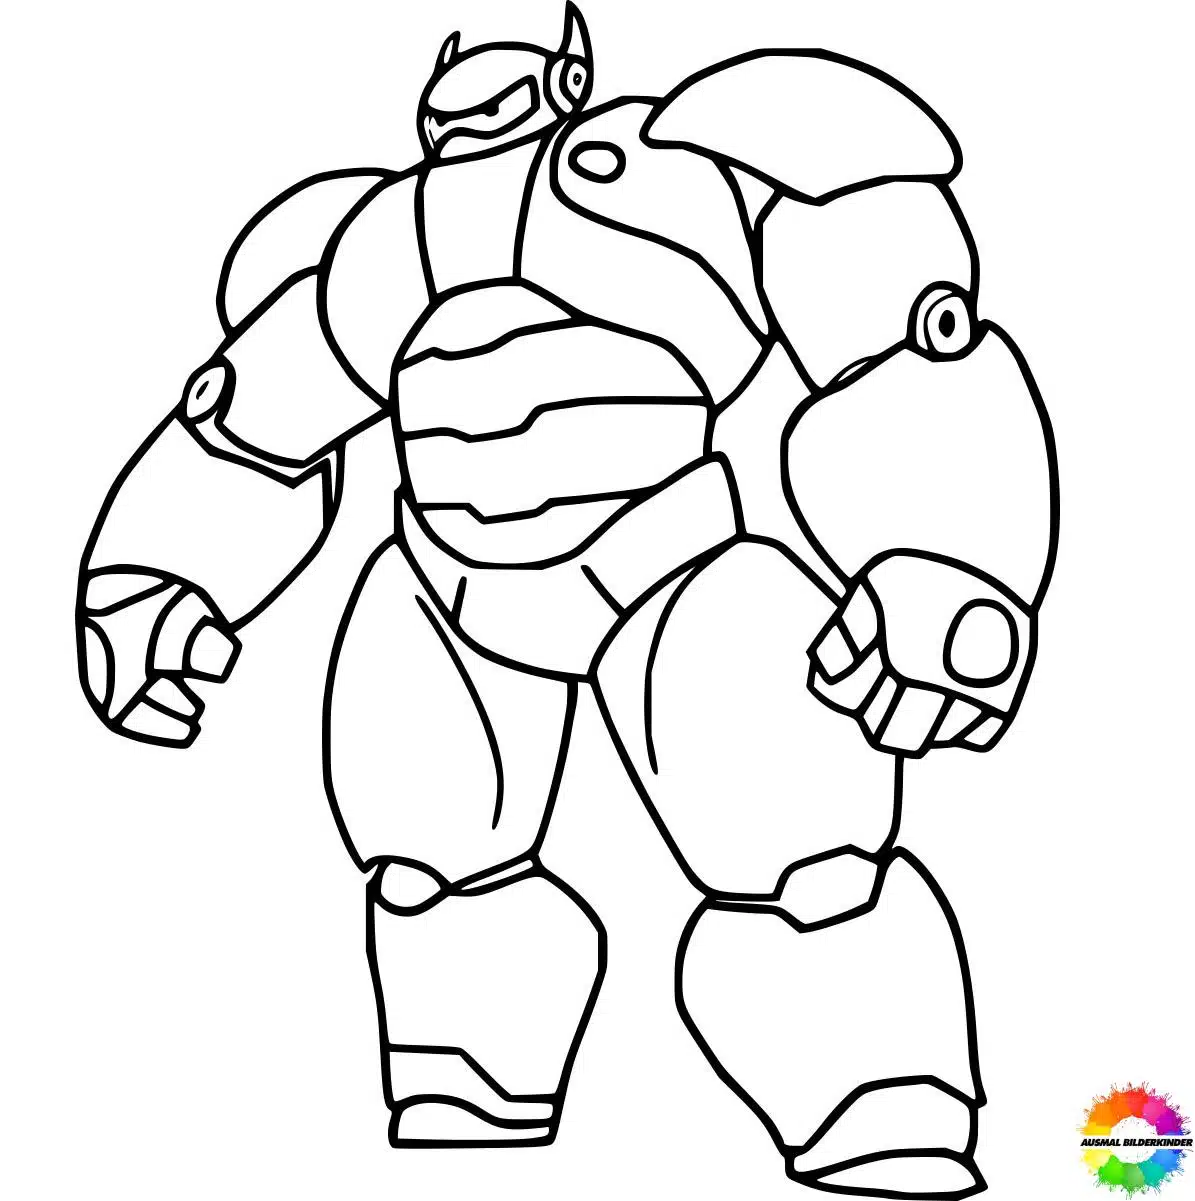 Big Hero 6 coloring pages free printable for kids